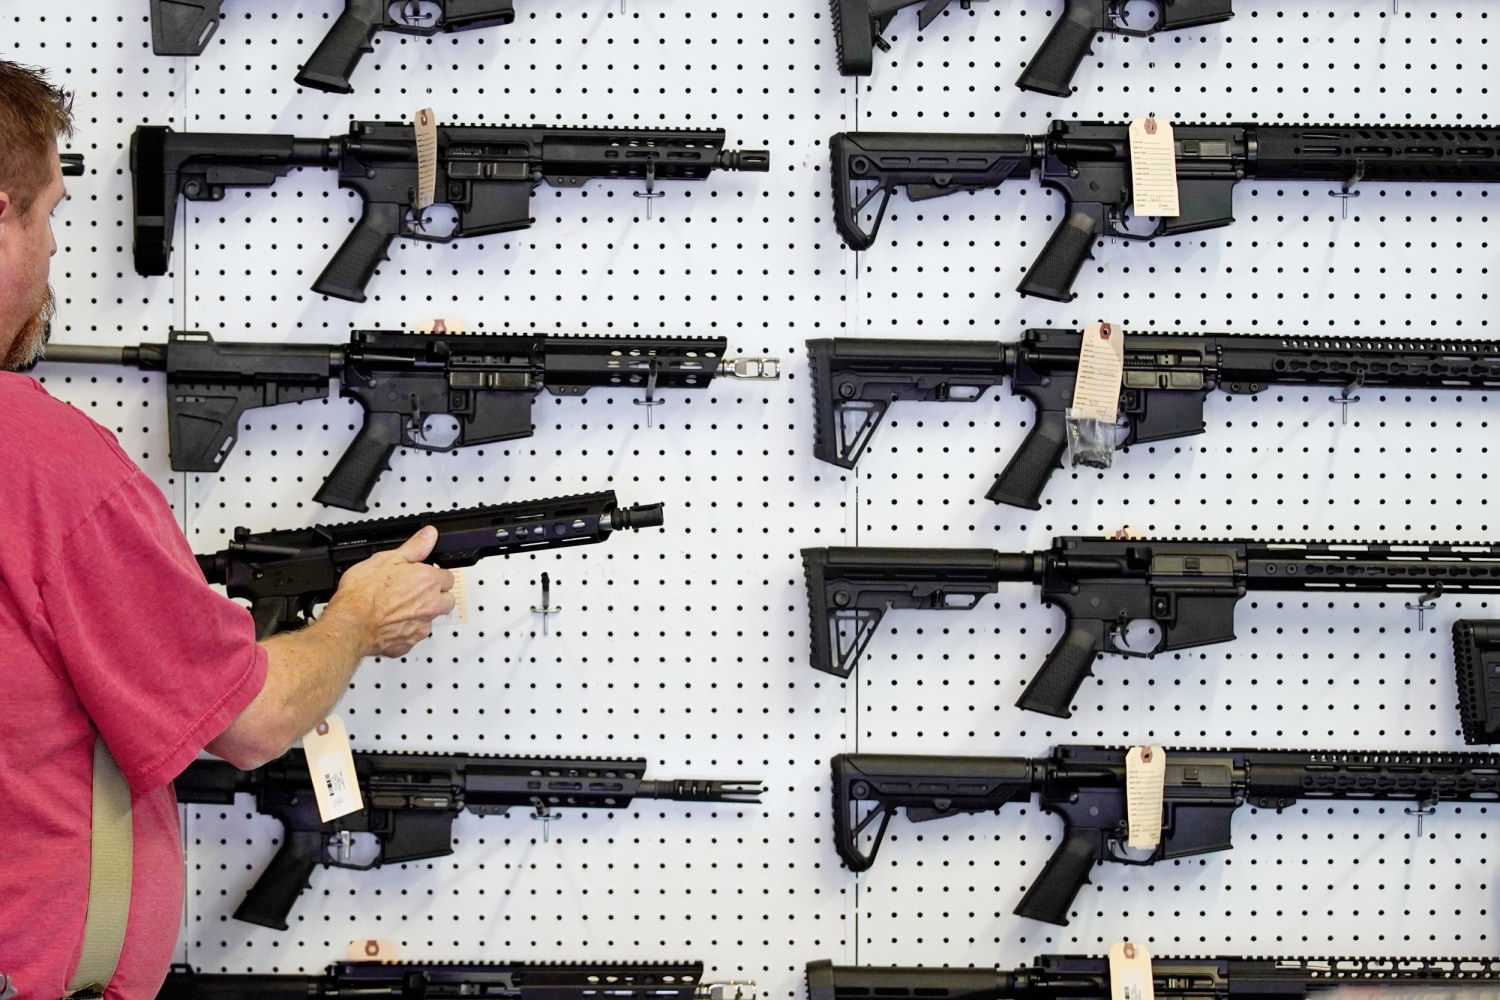 Poll finds Texans support raising age to buy guns from 18 to 21